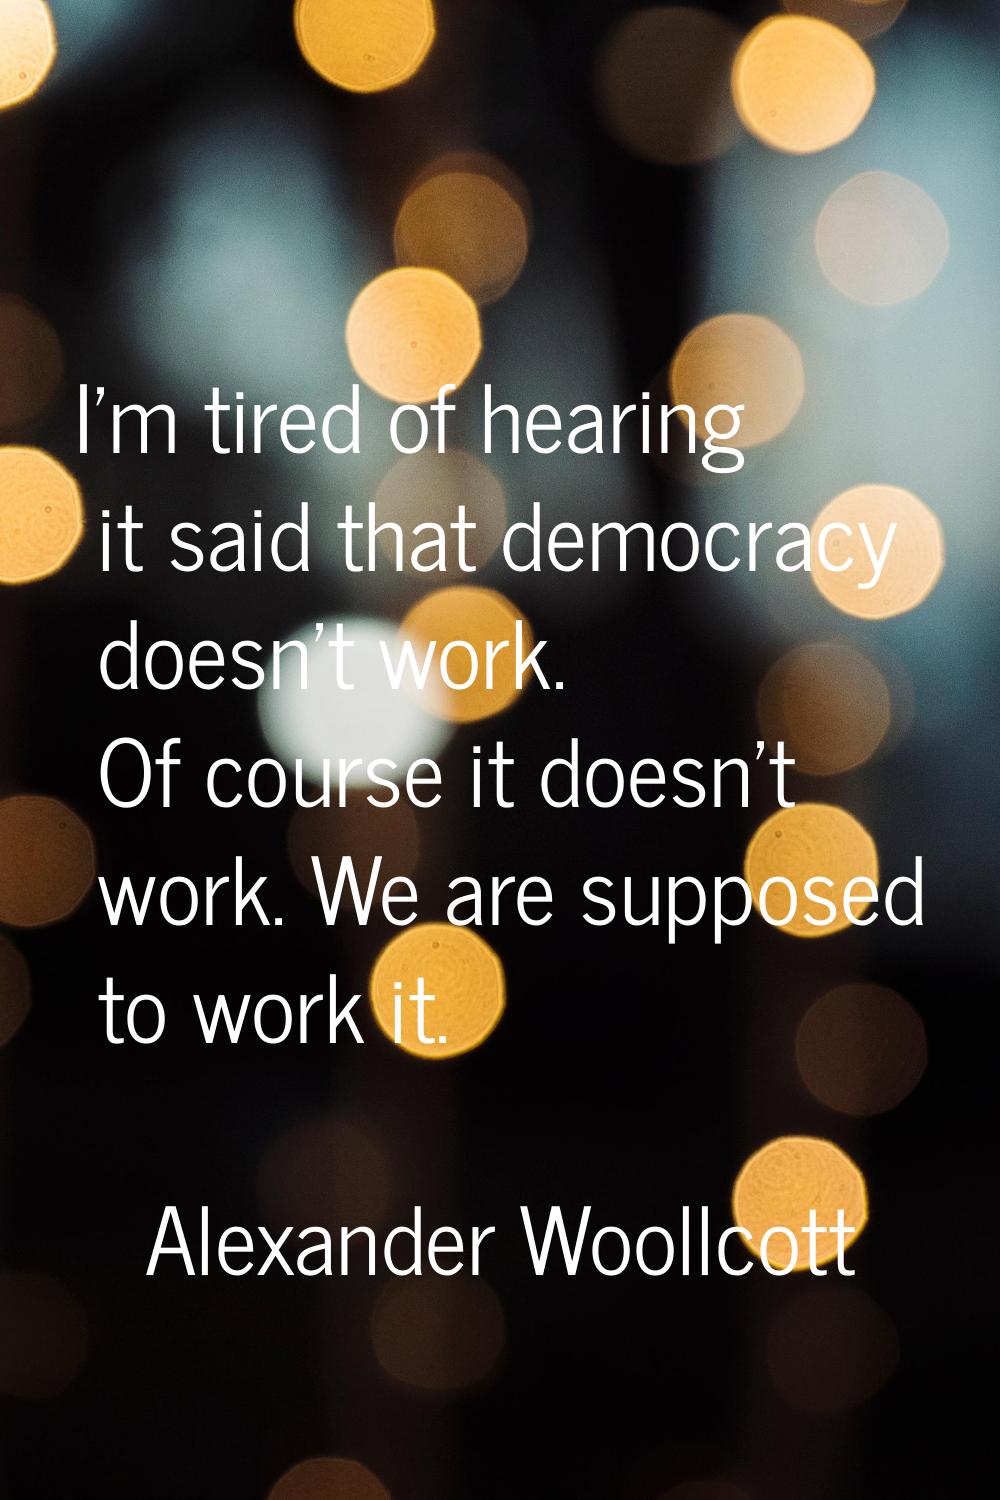 I'm tired of hearing it said that democracy doesn't work. Of course it doesn't work. We are suppose